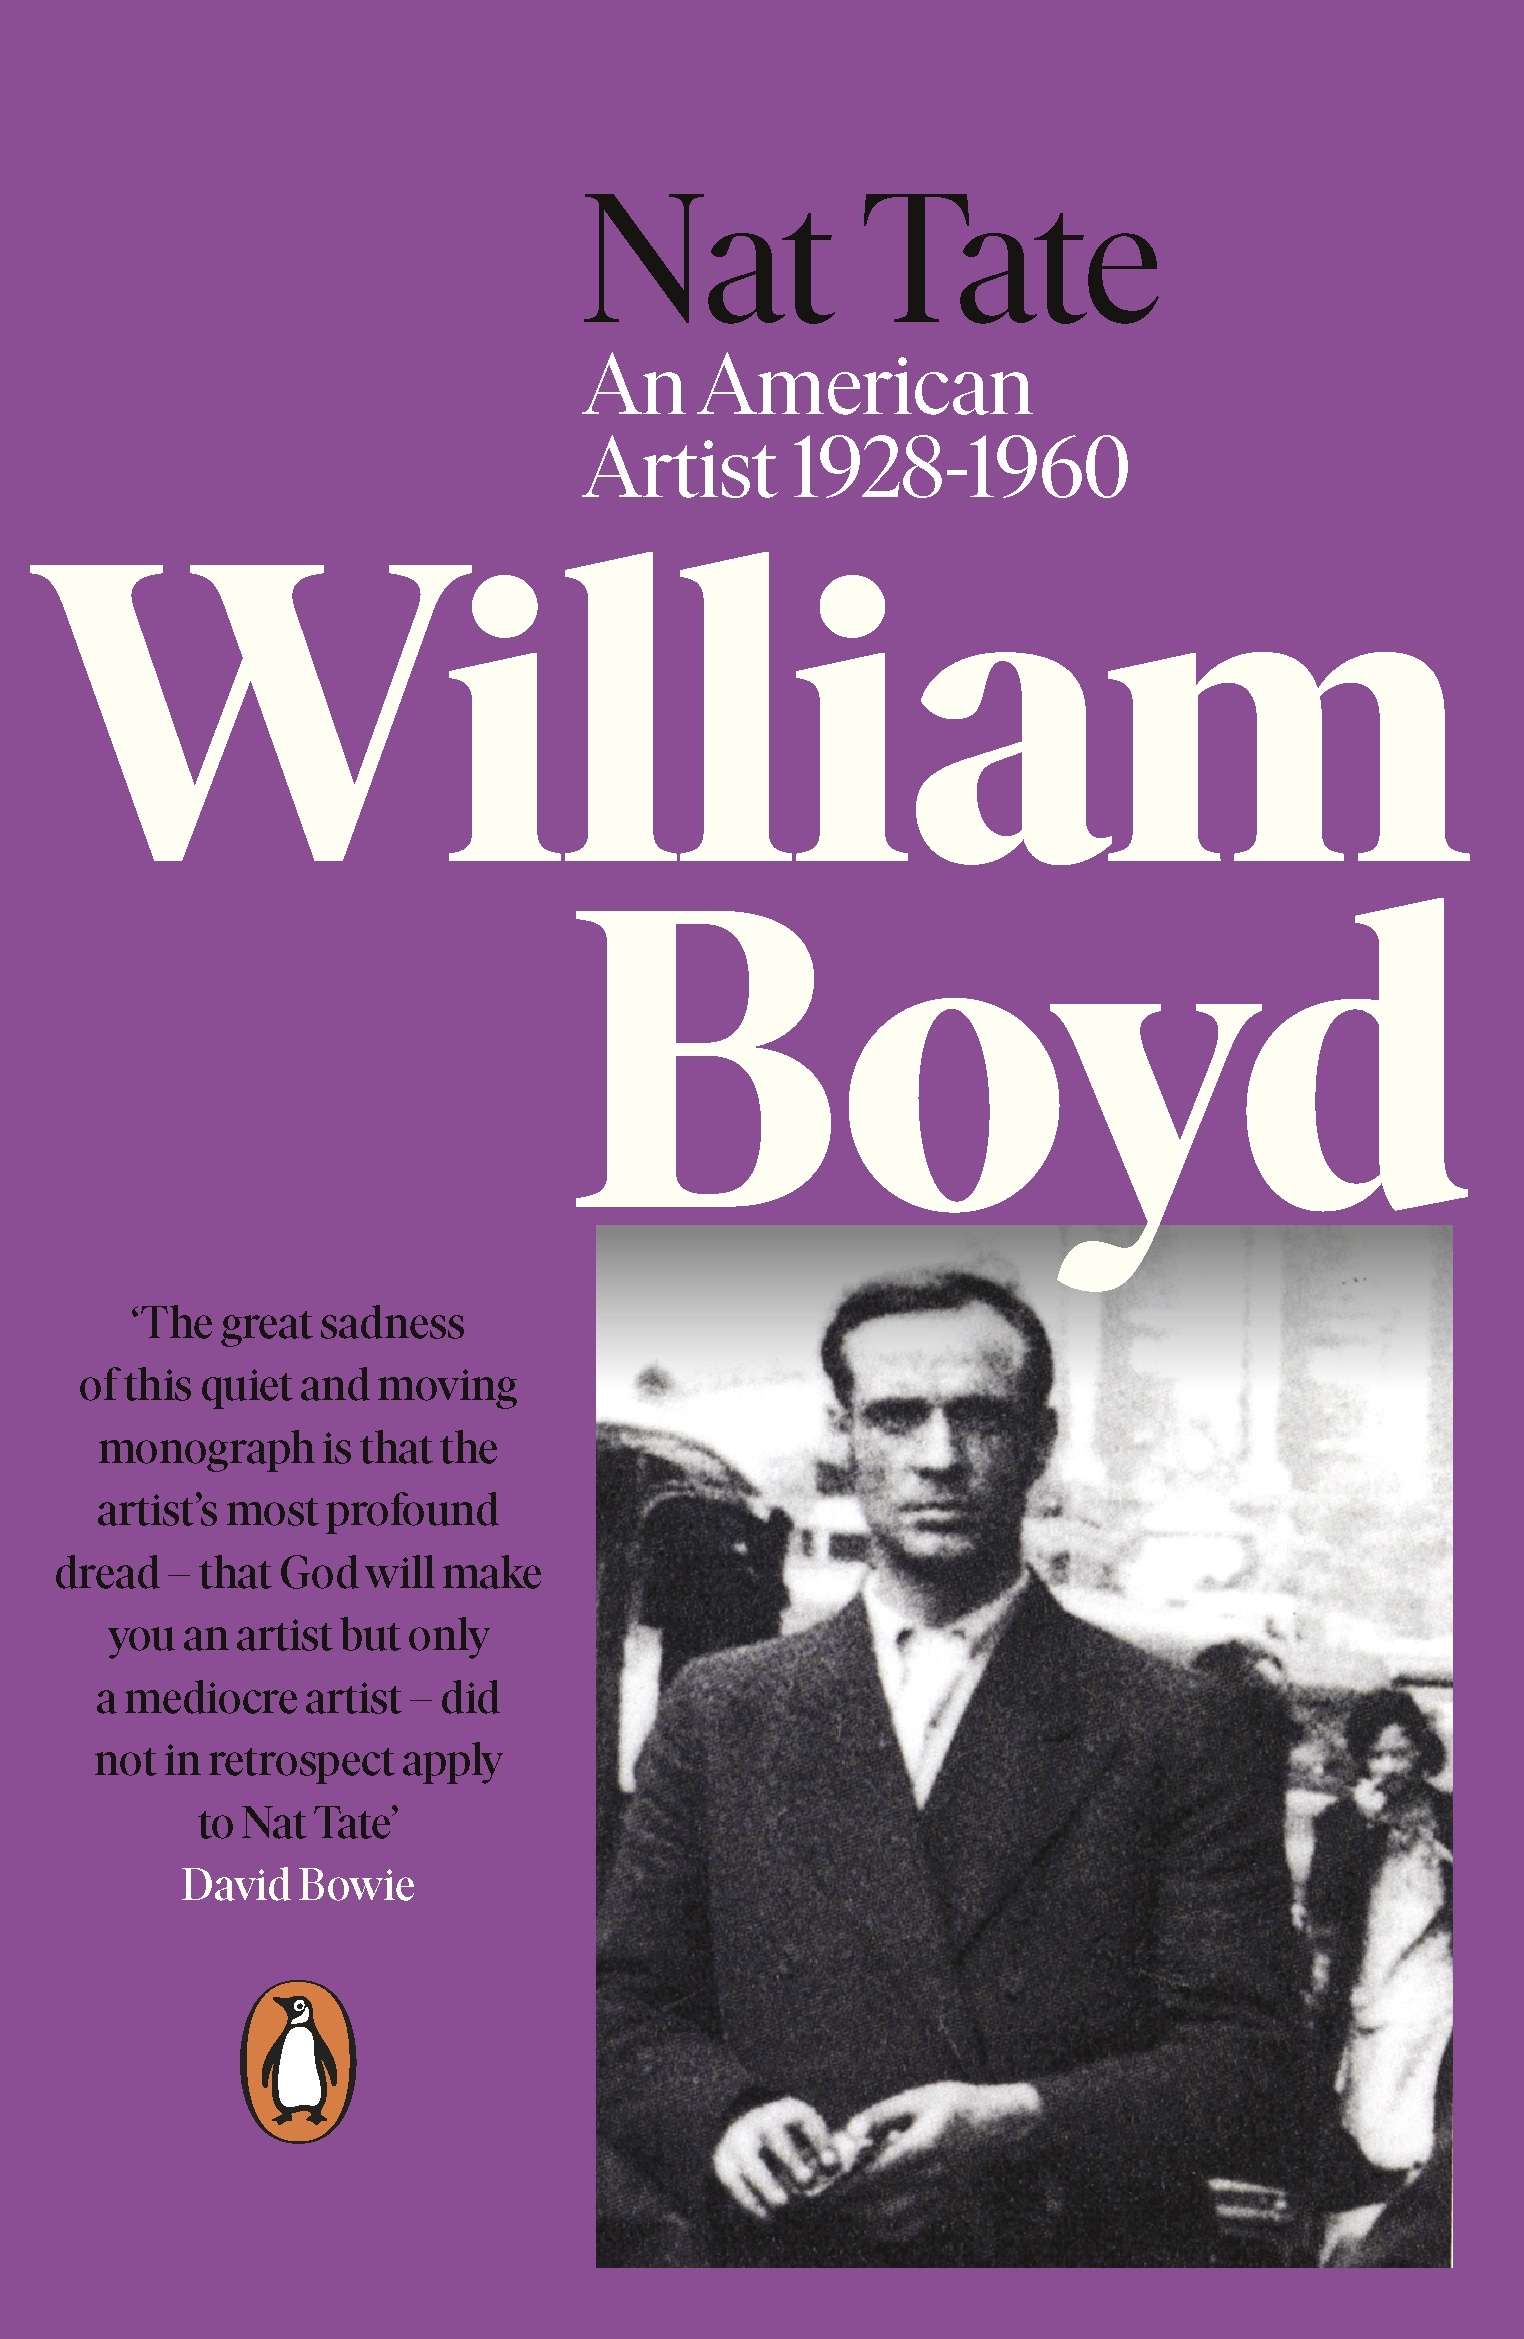 Book “Nat Tate” by William Boyd — August 27, 2020